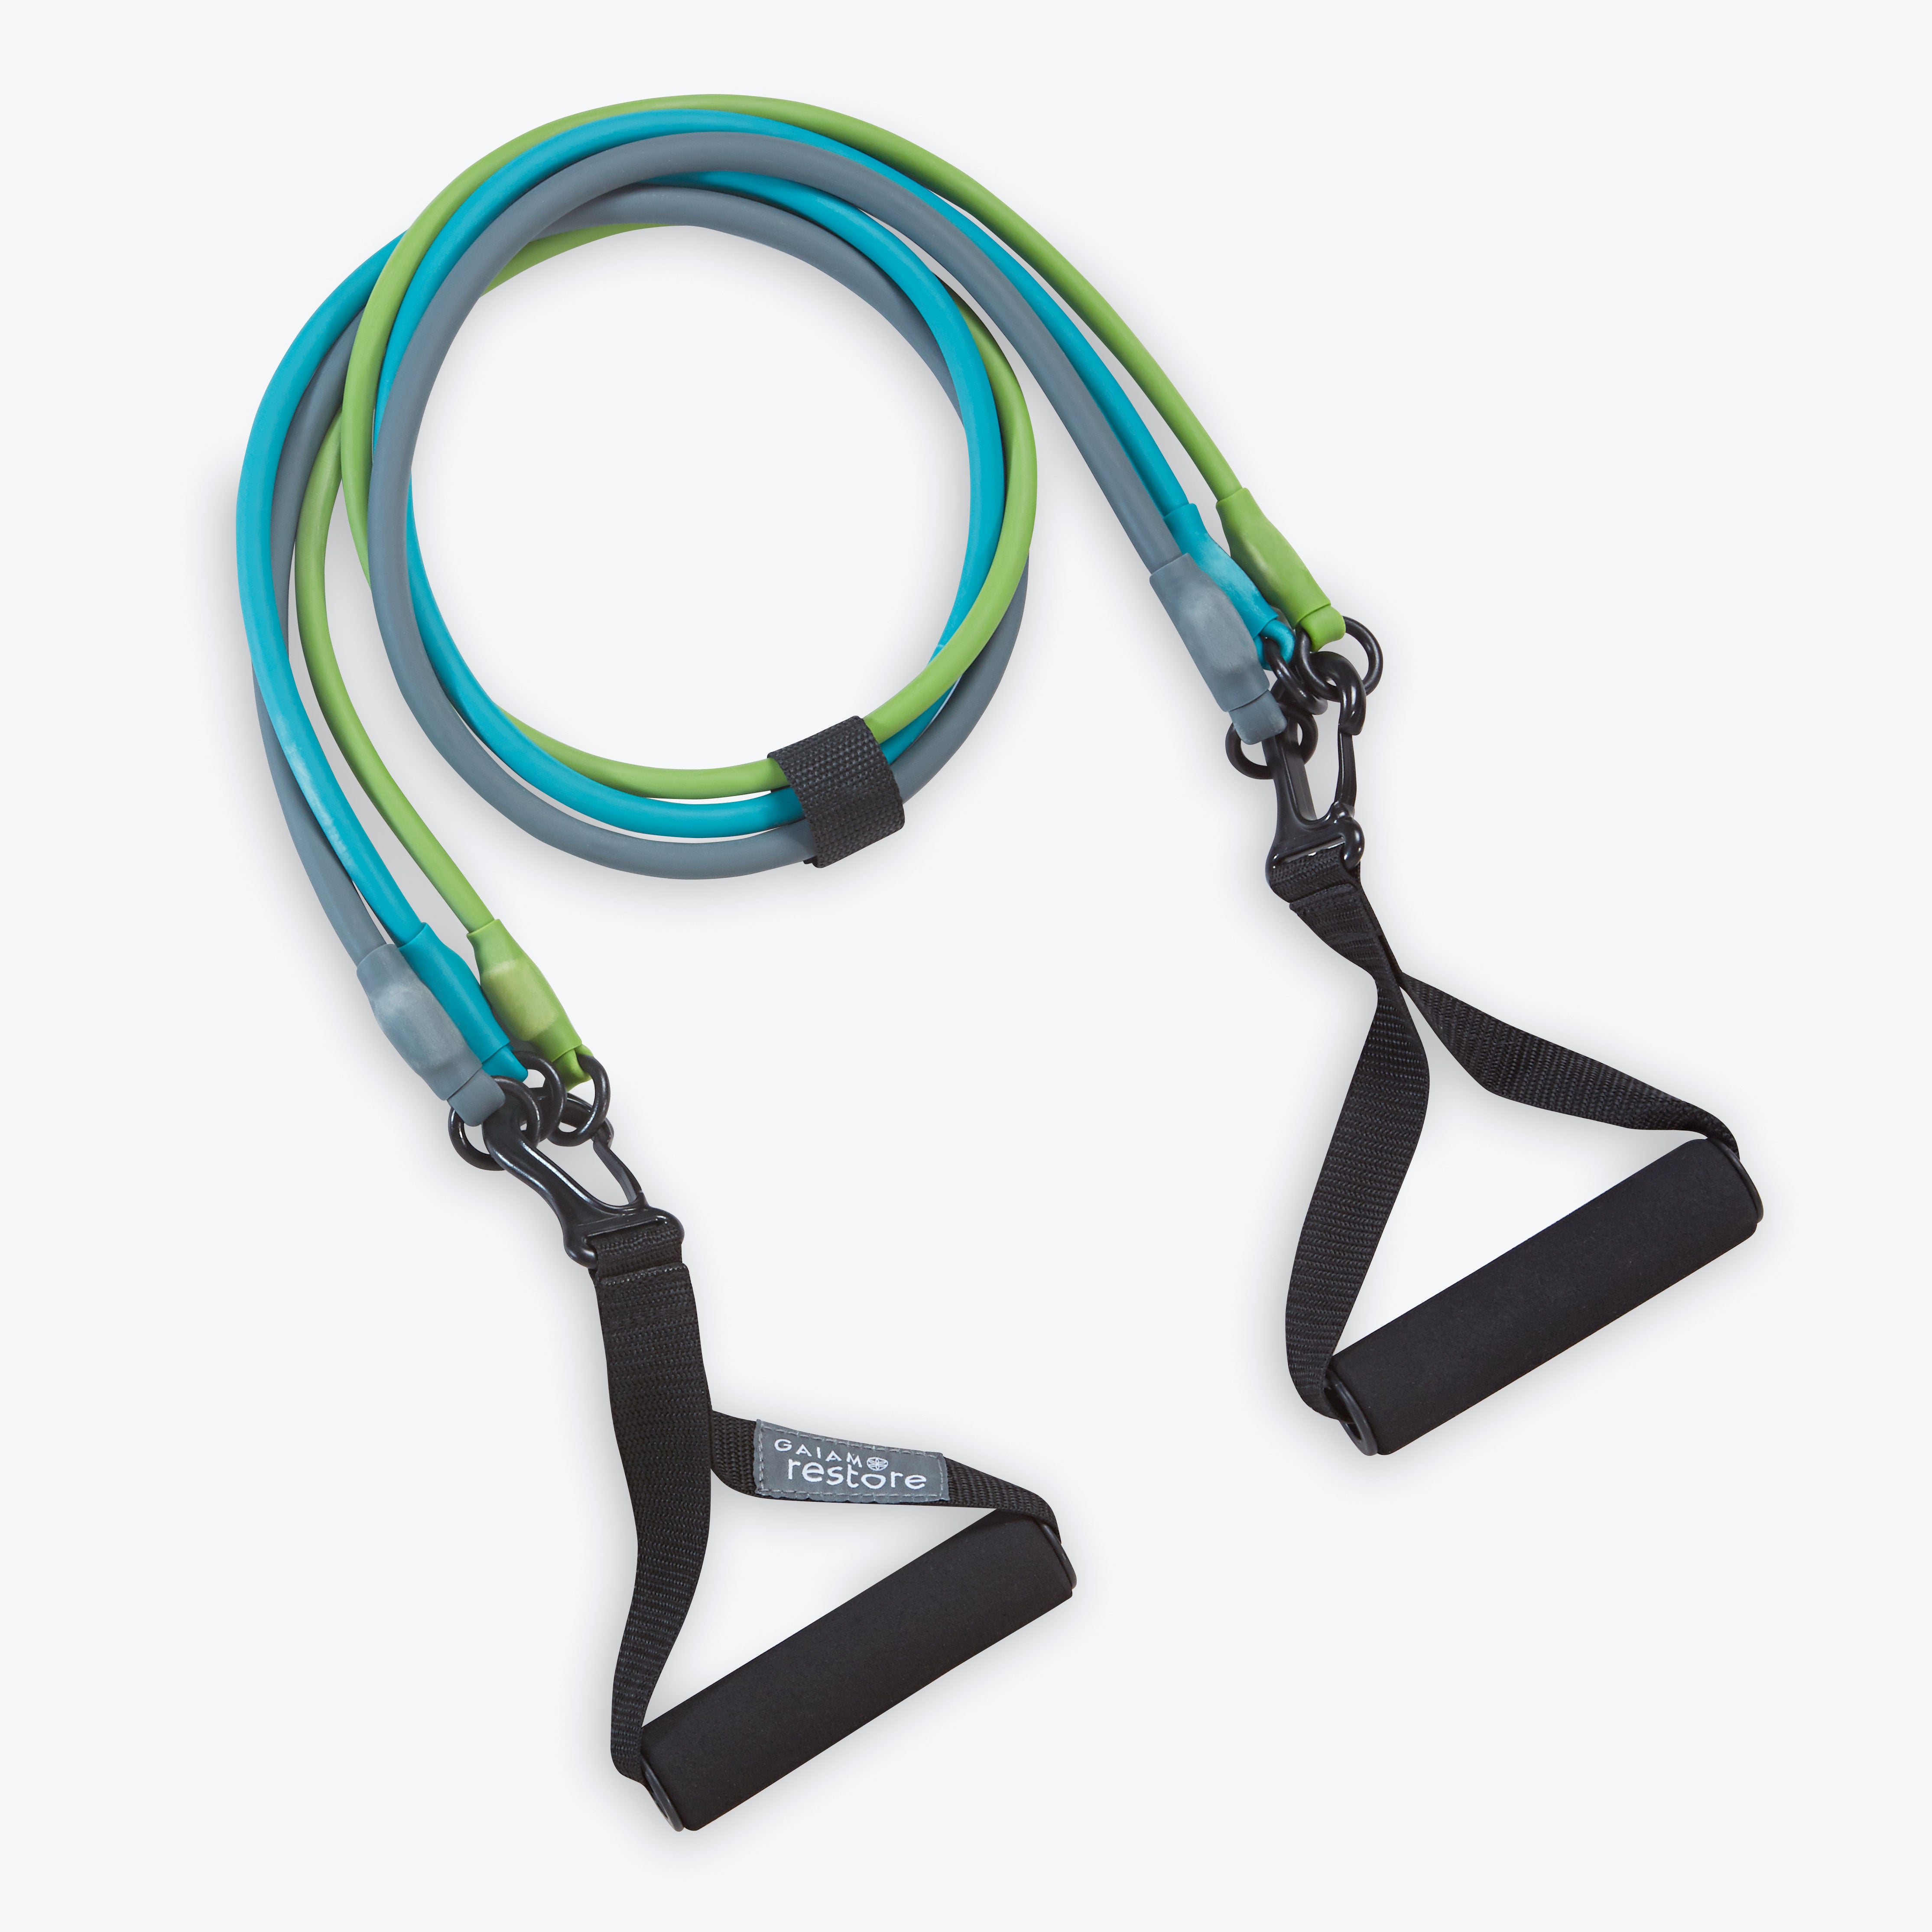 Gaiam Restore 3-in-1 Resistance Band Kit | Exercise Cord